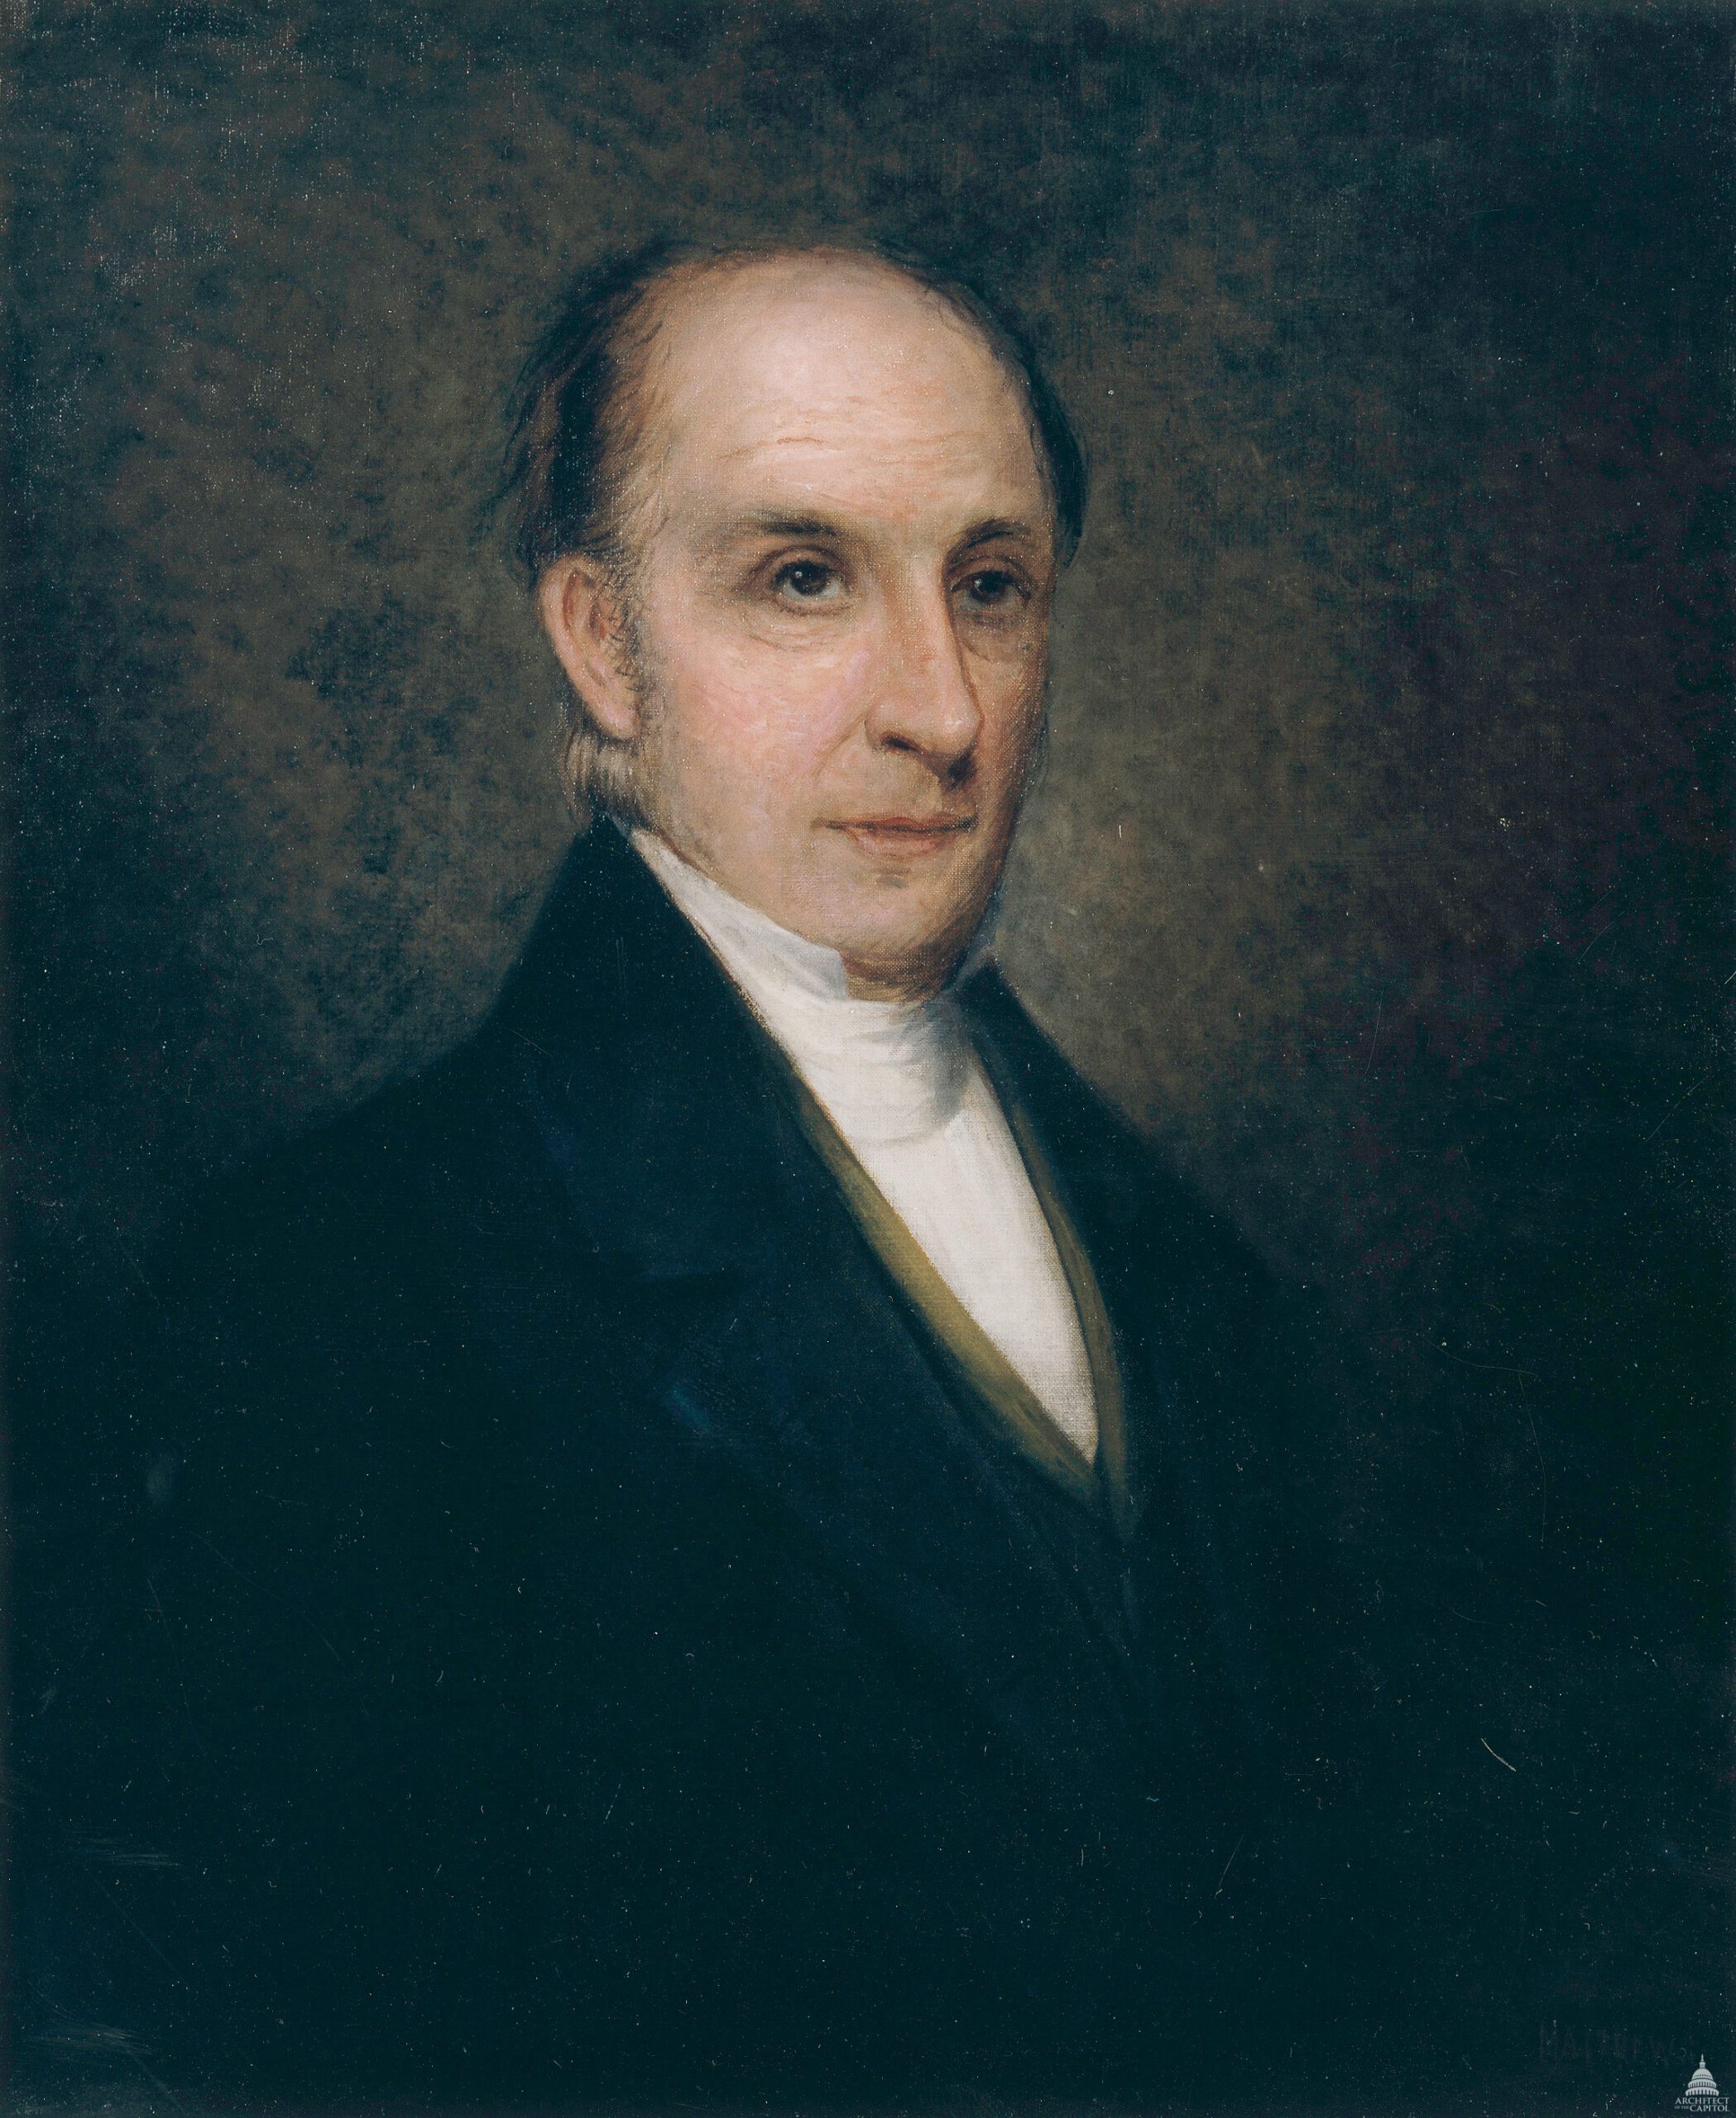 Portrait by George B. Matthews, after 1842 drawing by Alvan Clark Oil on canvas, 29-1/2" x 24-1/2" 1931 